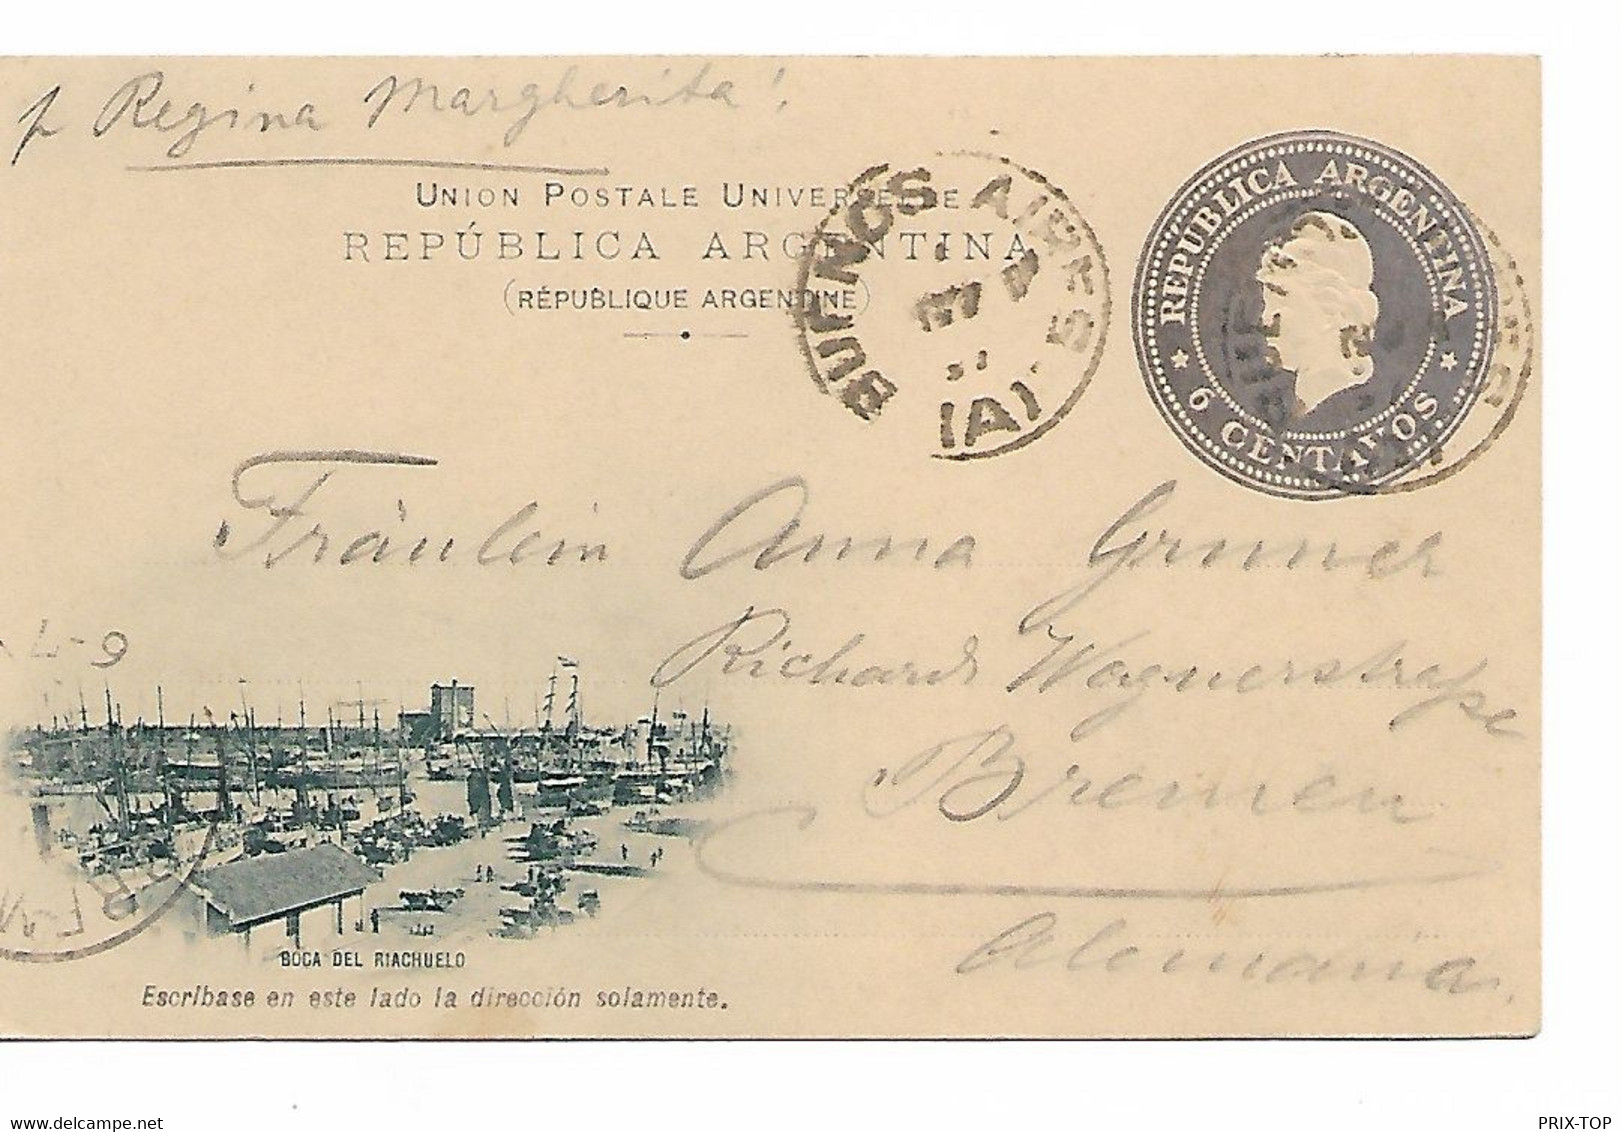 REF4790/ Argentina Postal Stationery Illustrated C. Buenos Aires 1897 > Germany Bremen Arrival Cancellation - Covers & Documents